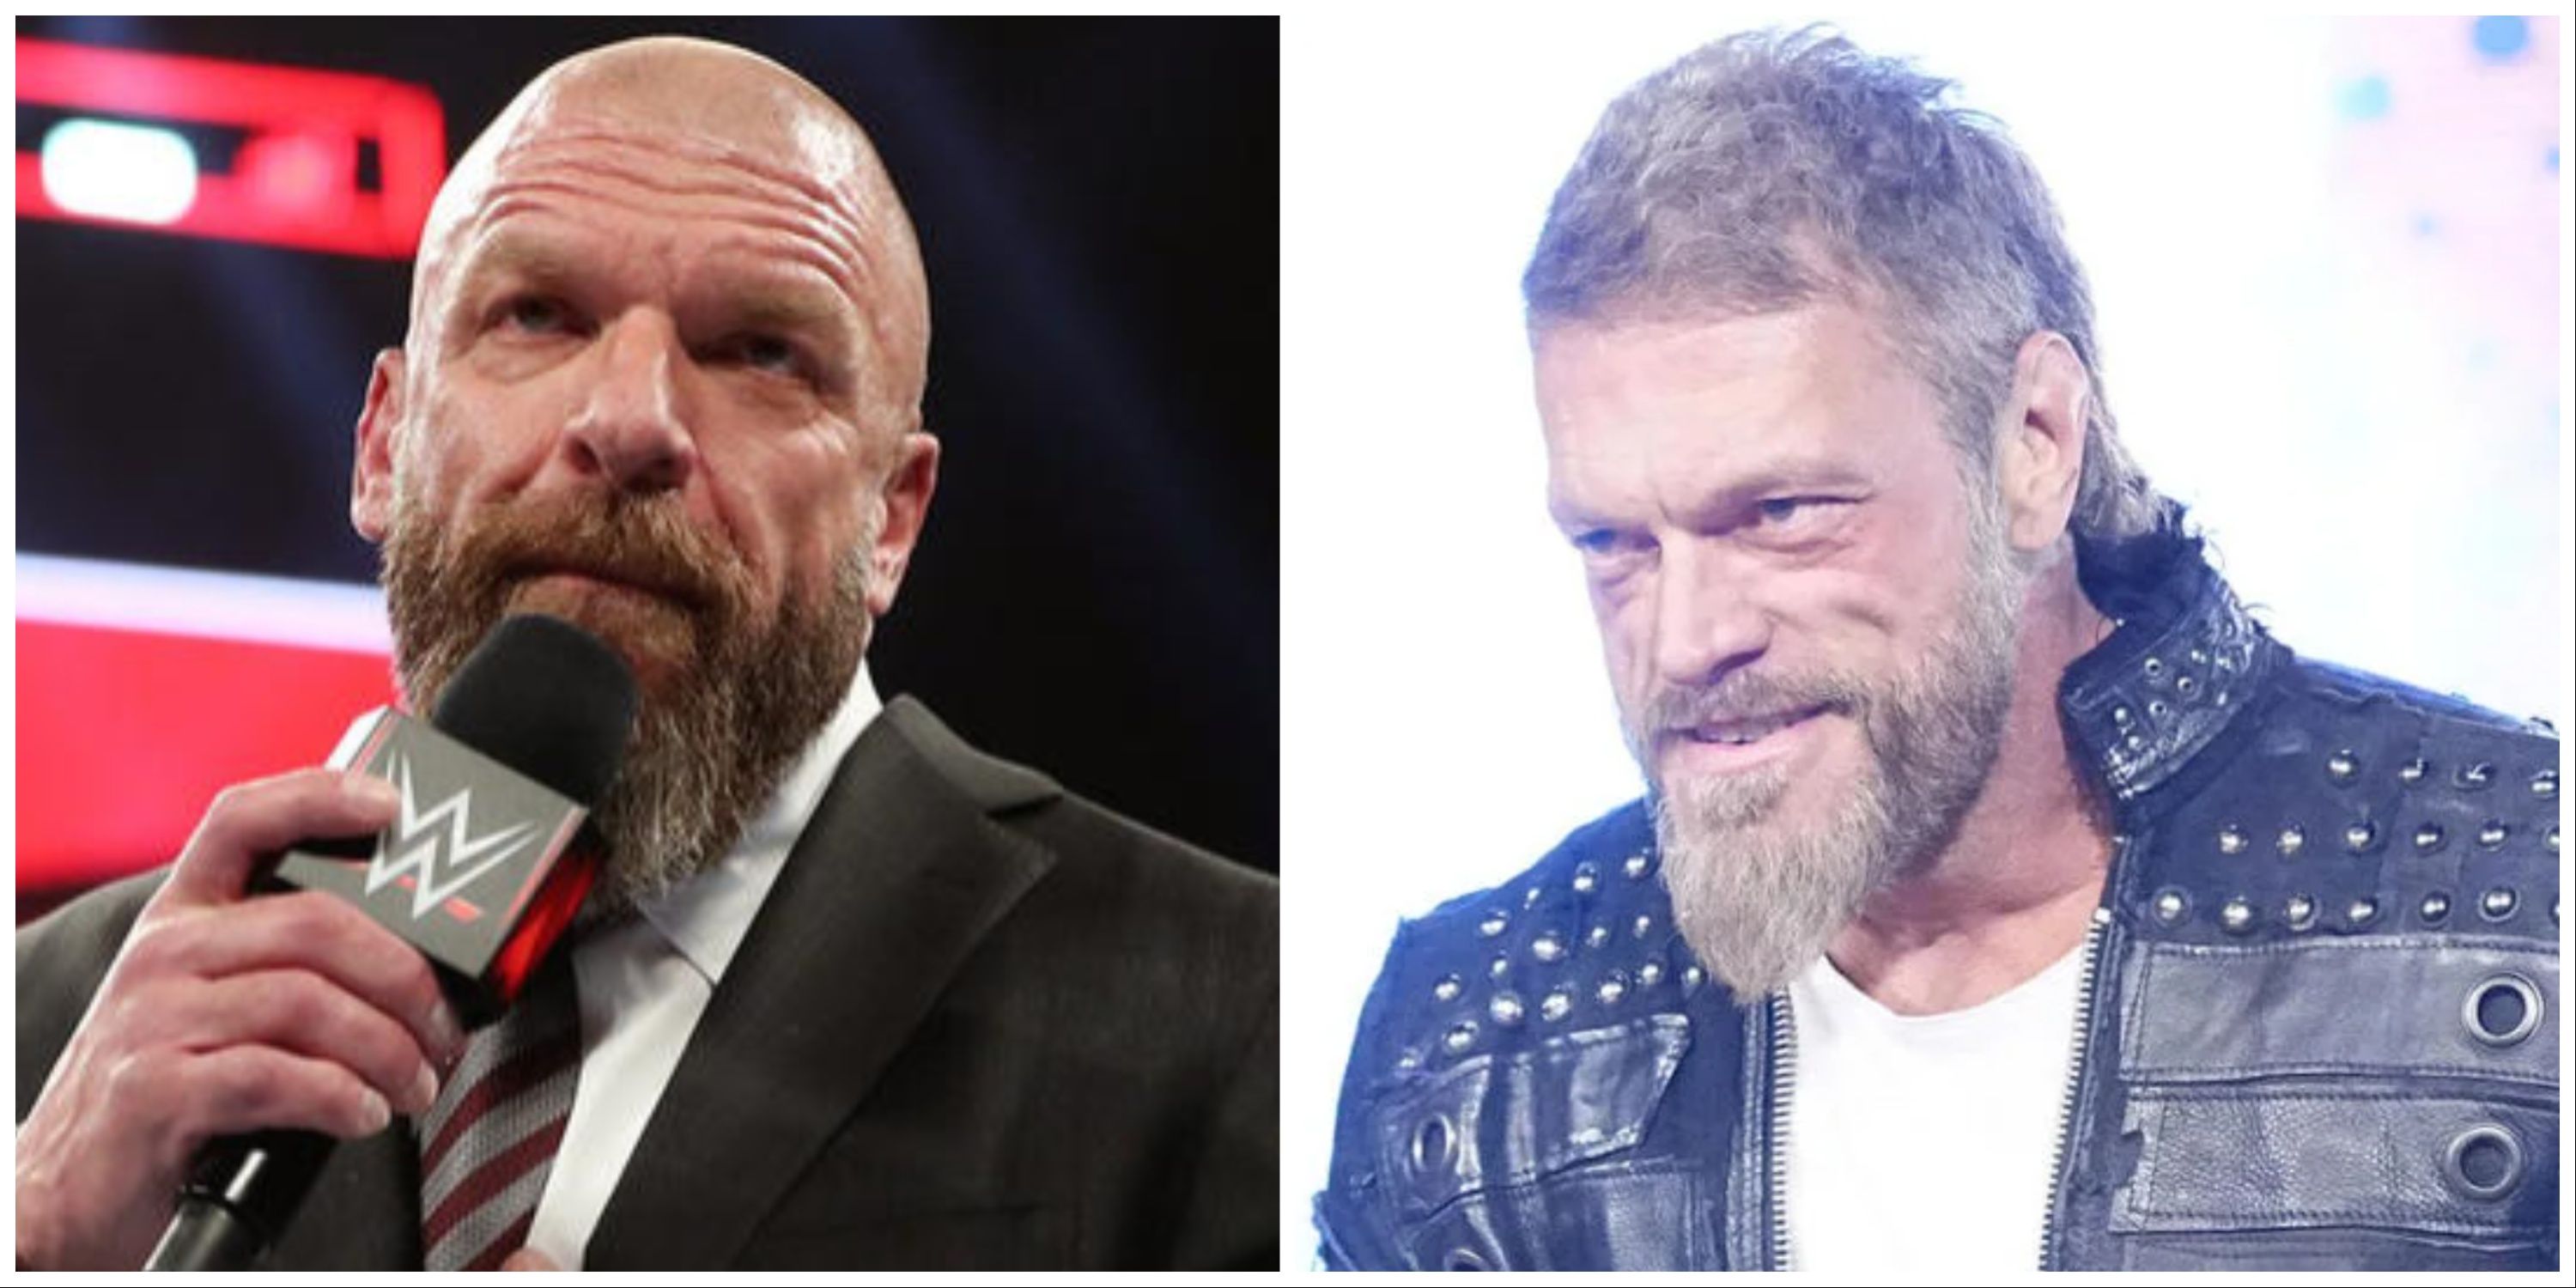 Triple H tried to get Edge to stay with WWE